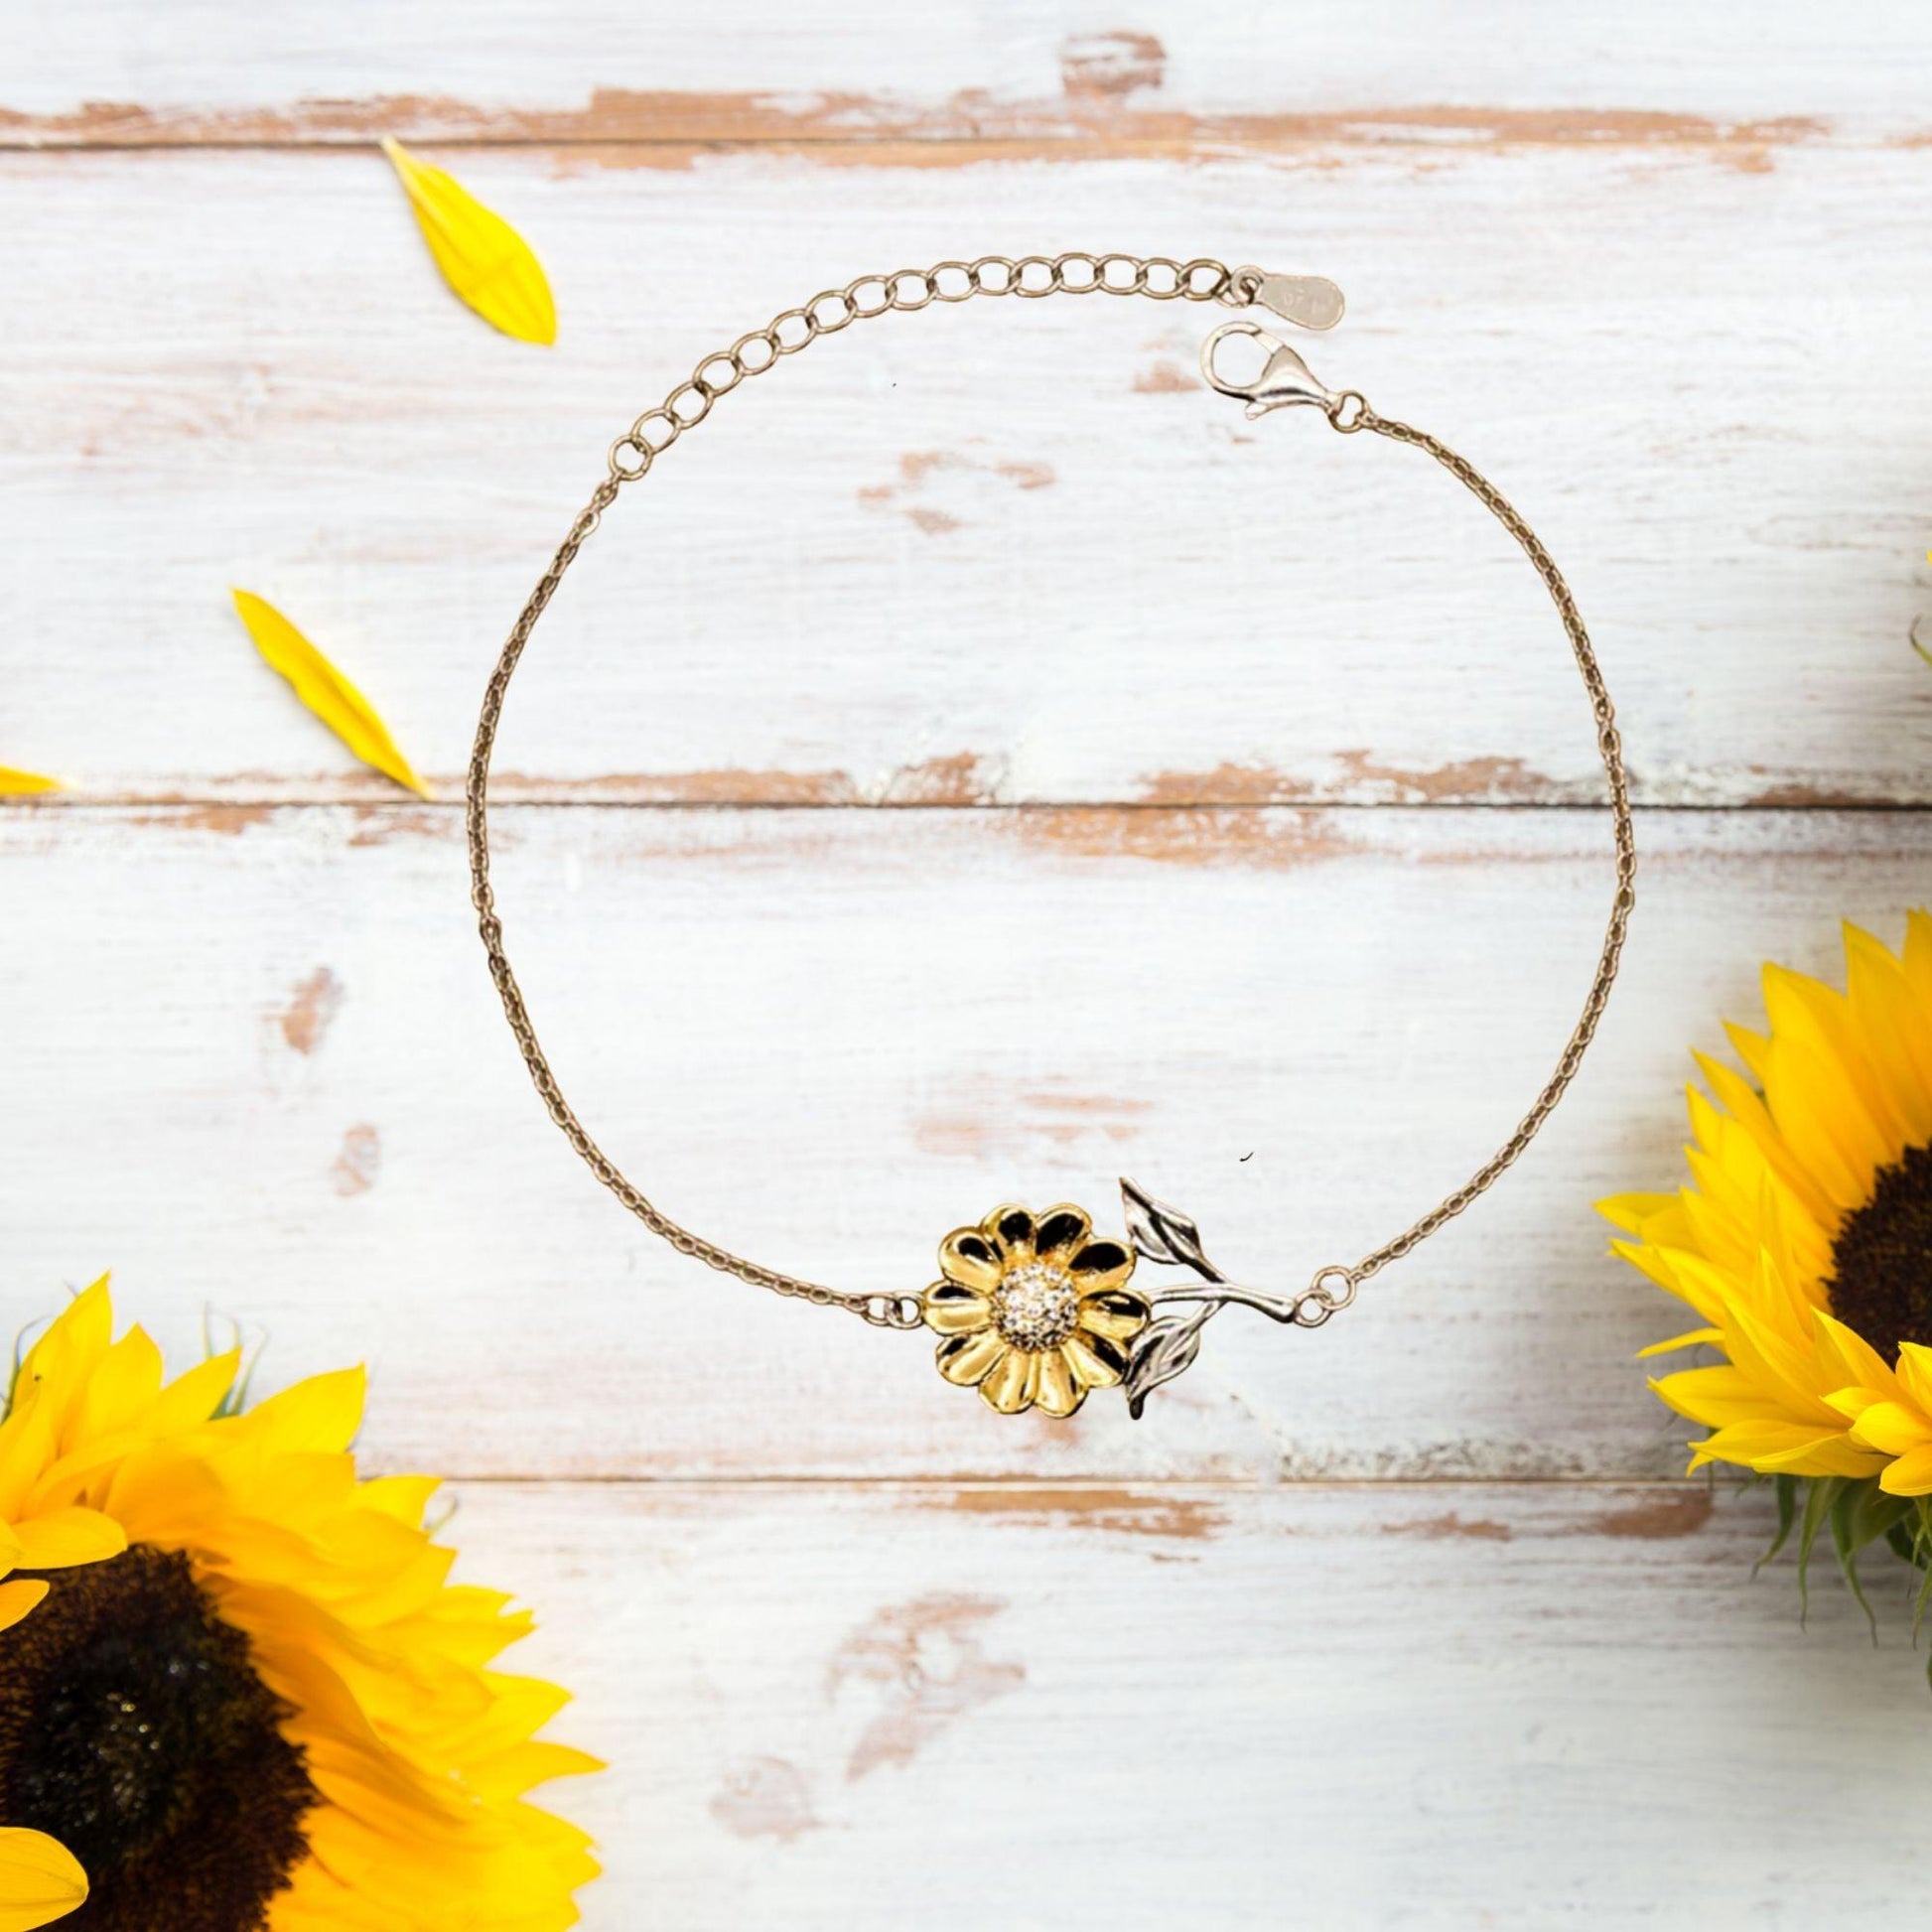 Sunflower Bracelet for Single Mom Present, Single Mom Always follow your dreams, never forget how amazing you are, Single Mom Birthday Christmas Gifts Jewelry for Girls Boys Teen Men Women - Mallard Moon Gift Shop